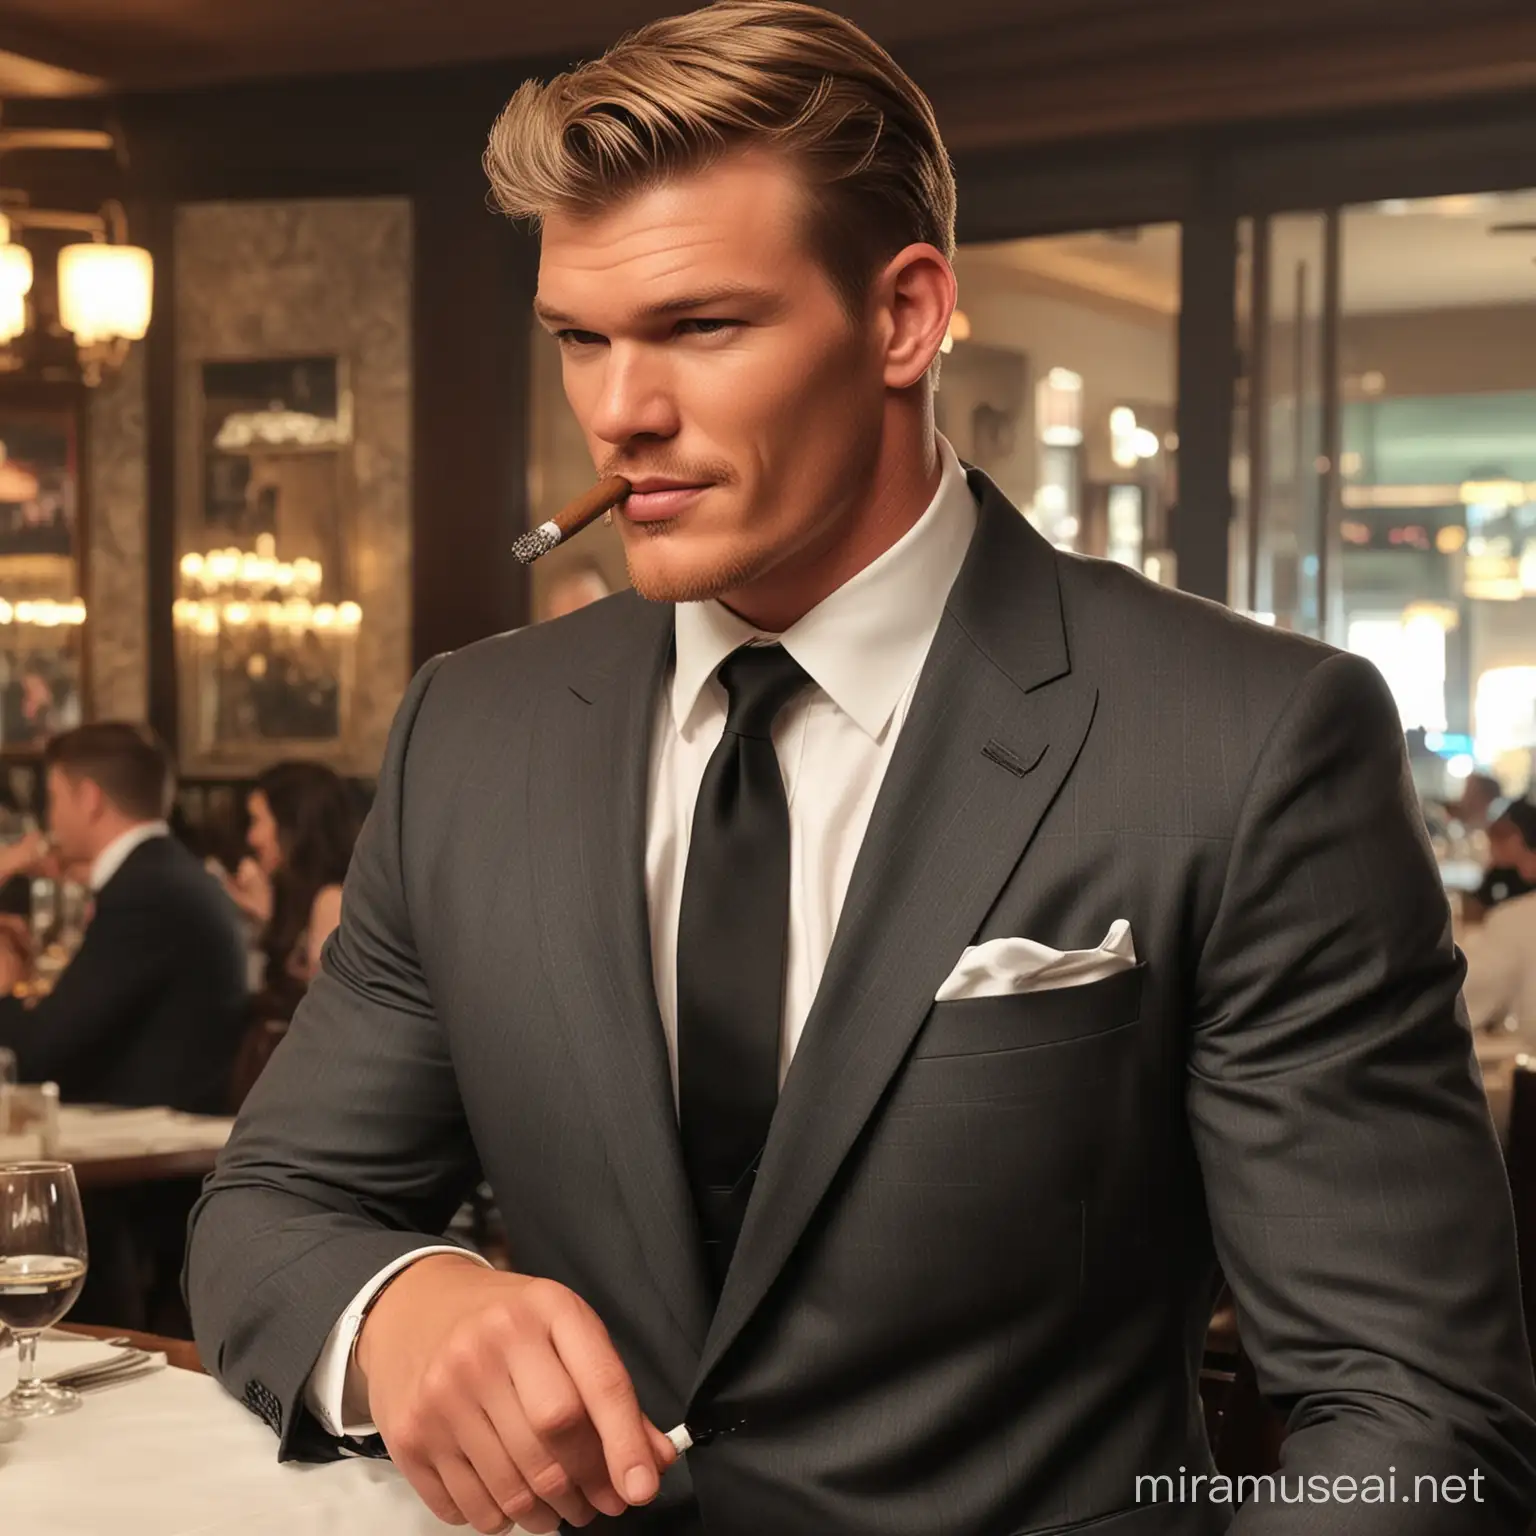 Alan Ritchson wearing a conservative business suit at a fancy restaurant, smoking a cigar, sporting a 1950s business haircut.